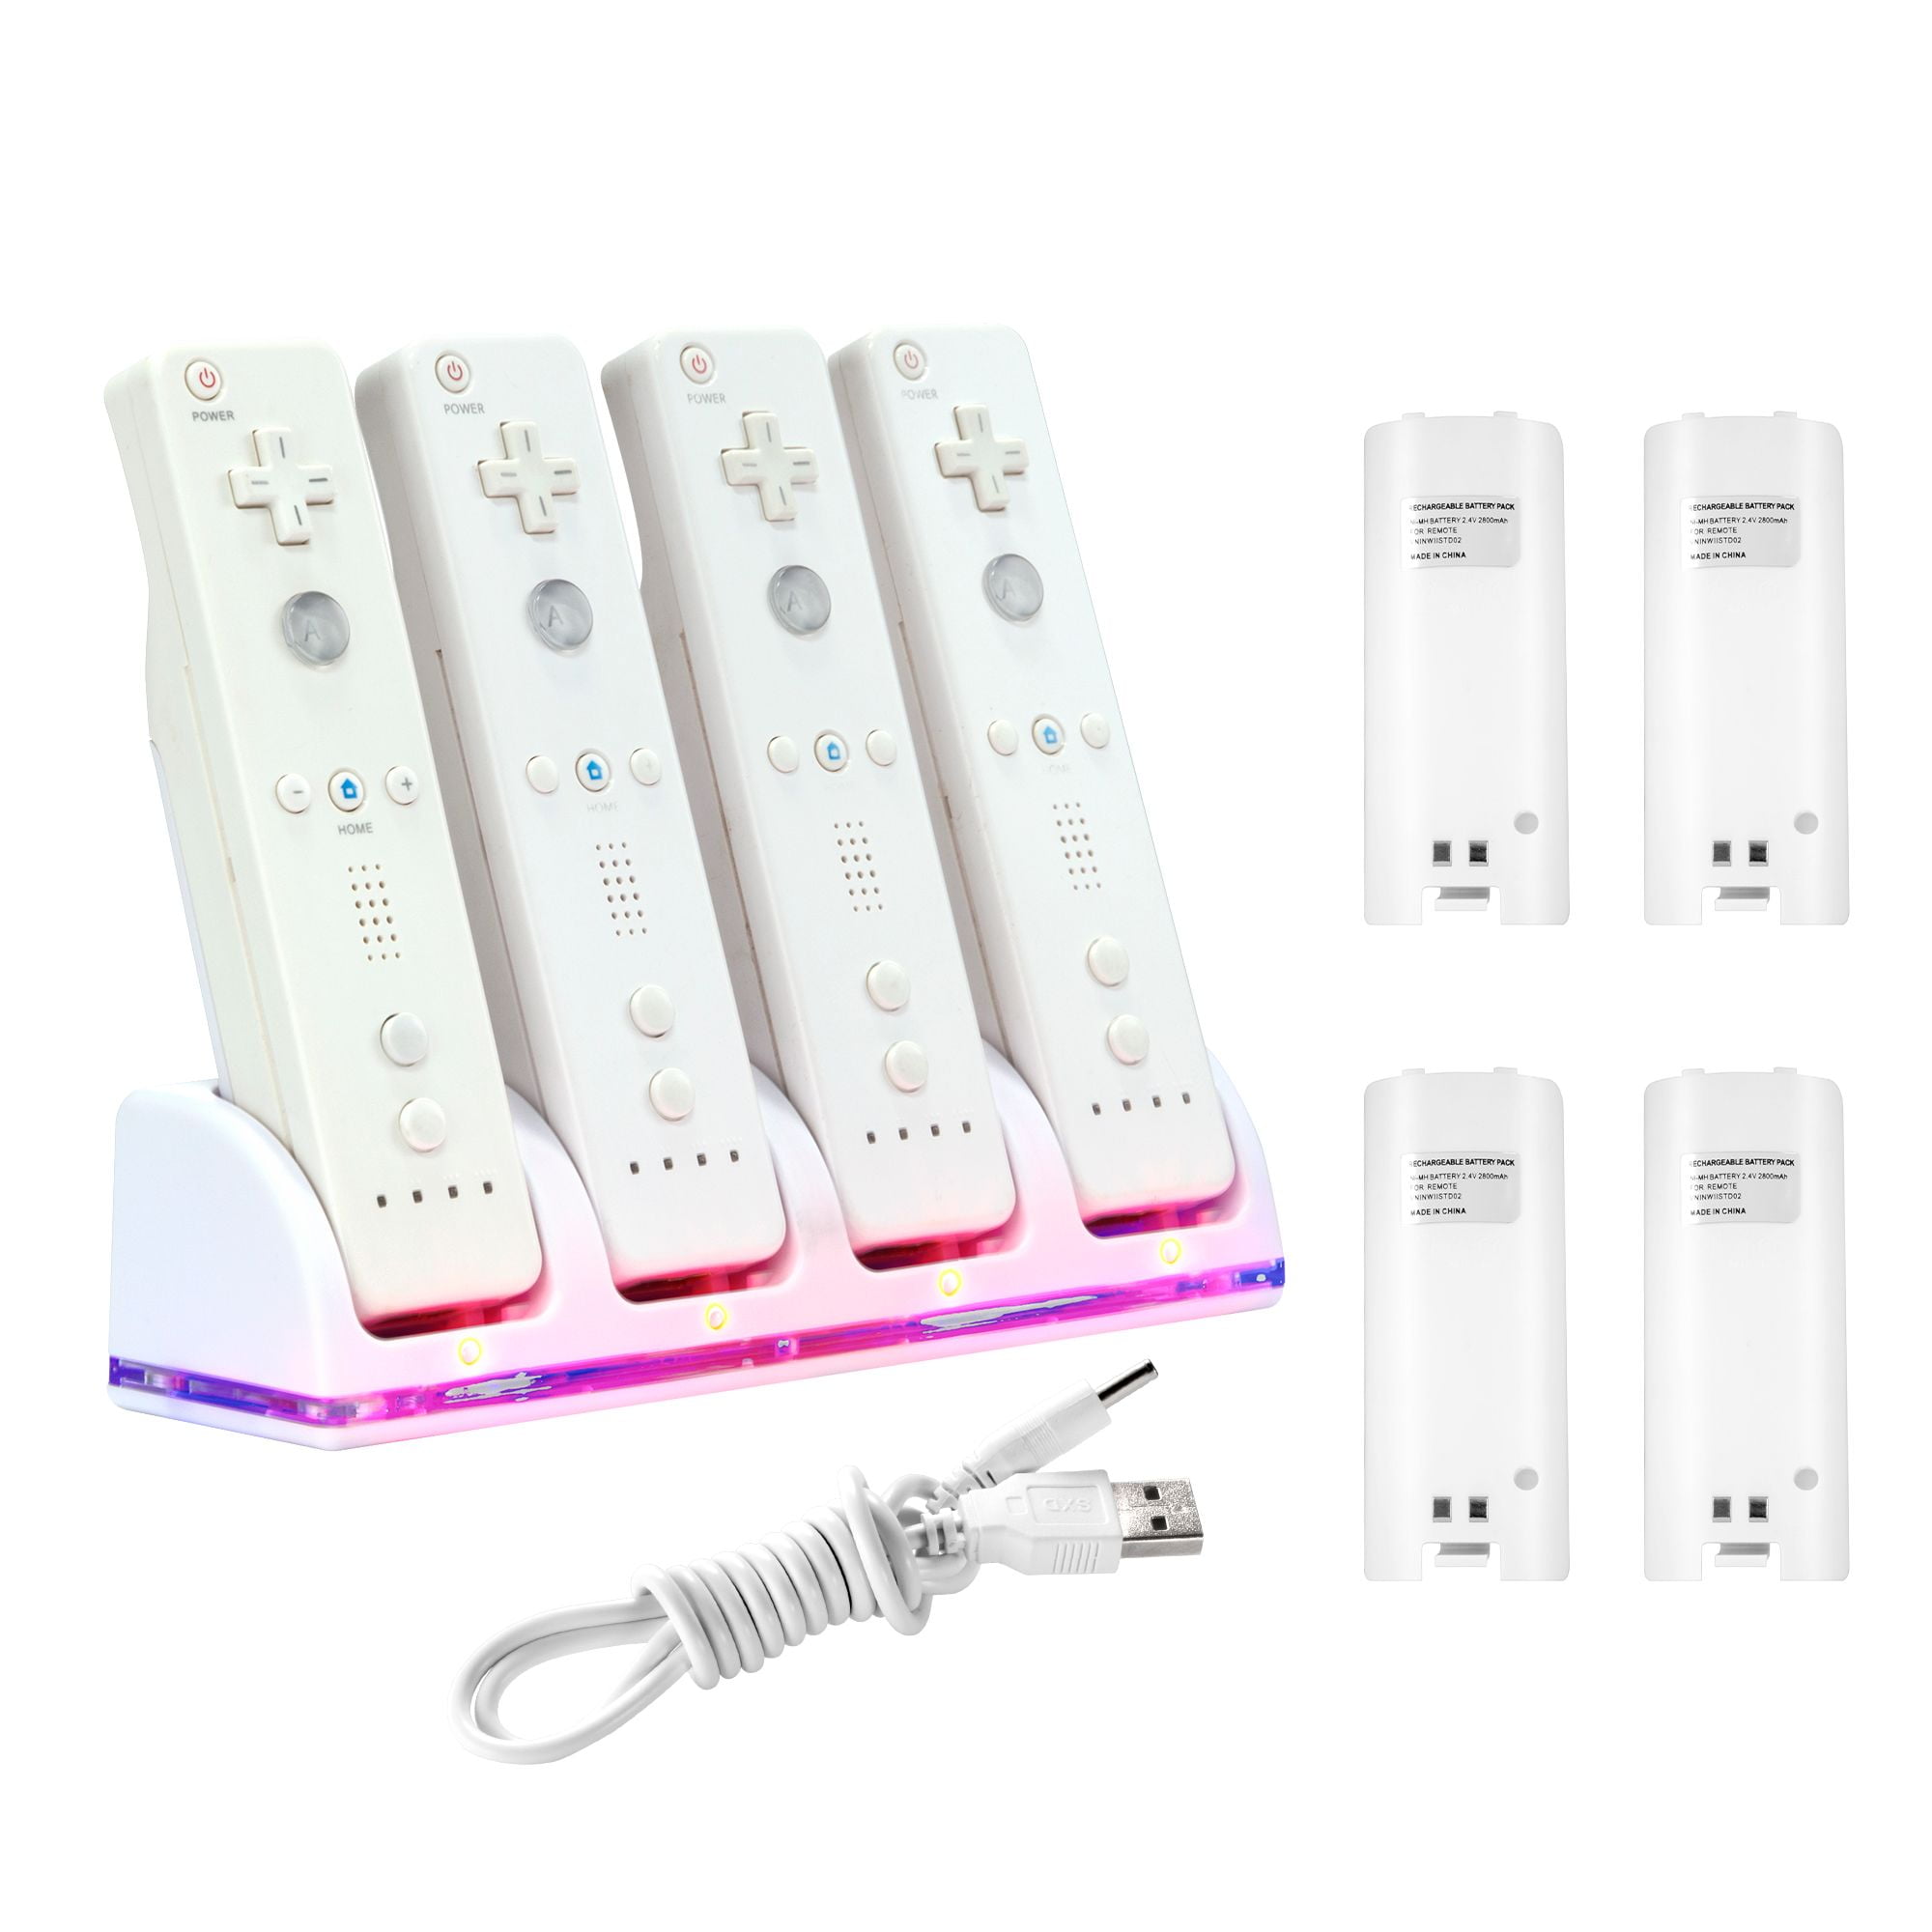 Insten Quad Dock Charge Station Cradle Charger with 4-pack Rechargeable Battery For Nintendo Wii Wii U Remote Controller - White (with USB Charging Cable)